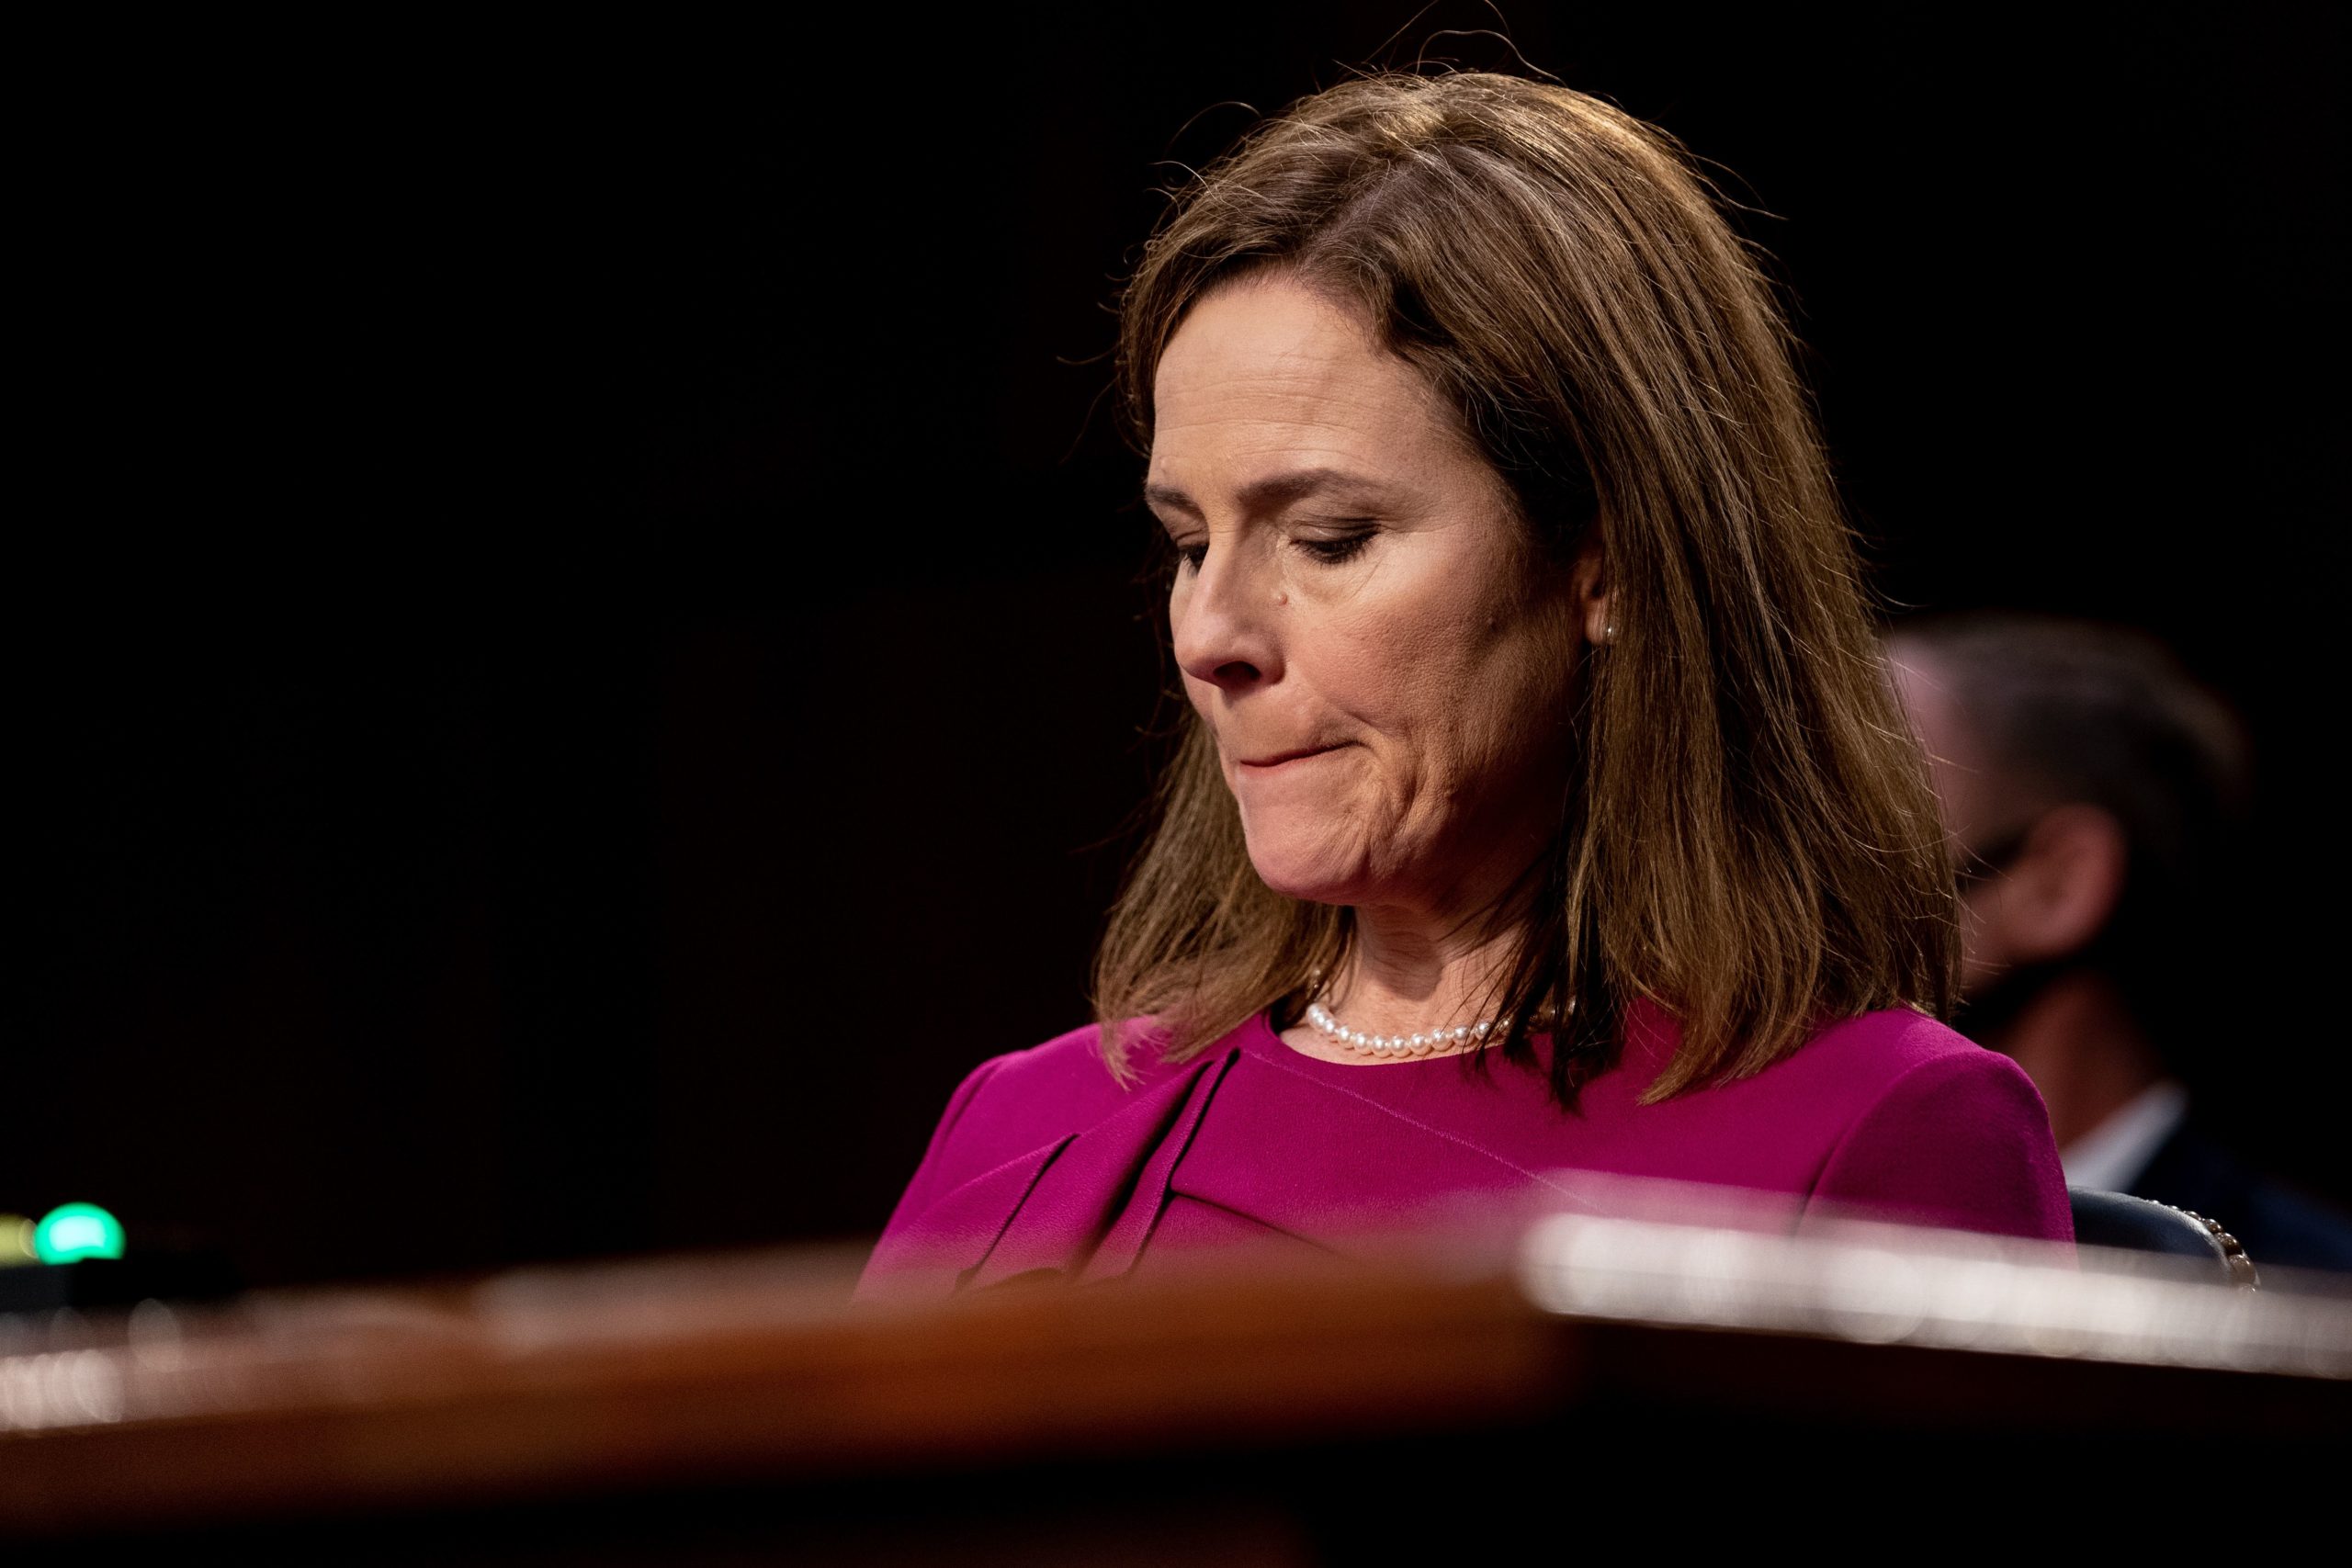 Judge Amy Coney Barrett attends first day of her Senate confirmation hearing to the Supreme Court on Capitol Hill in Washington, DC on October 12, 2020.